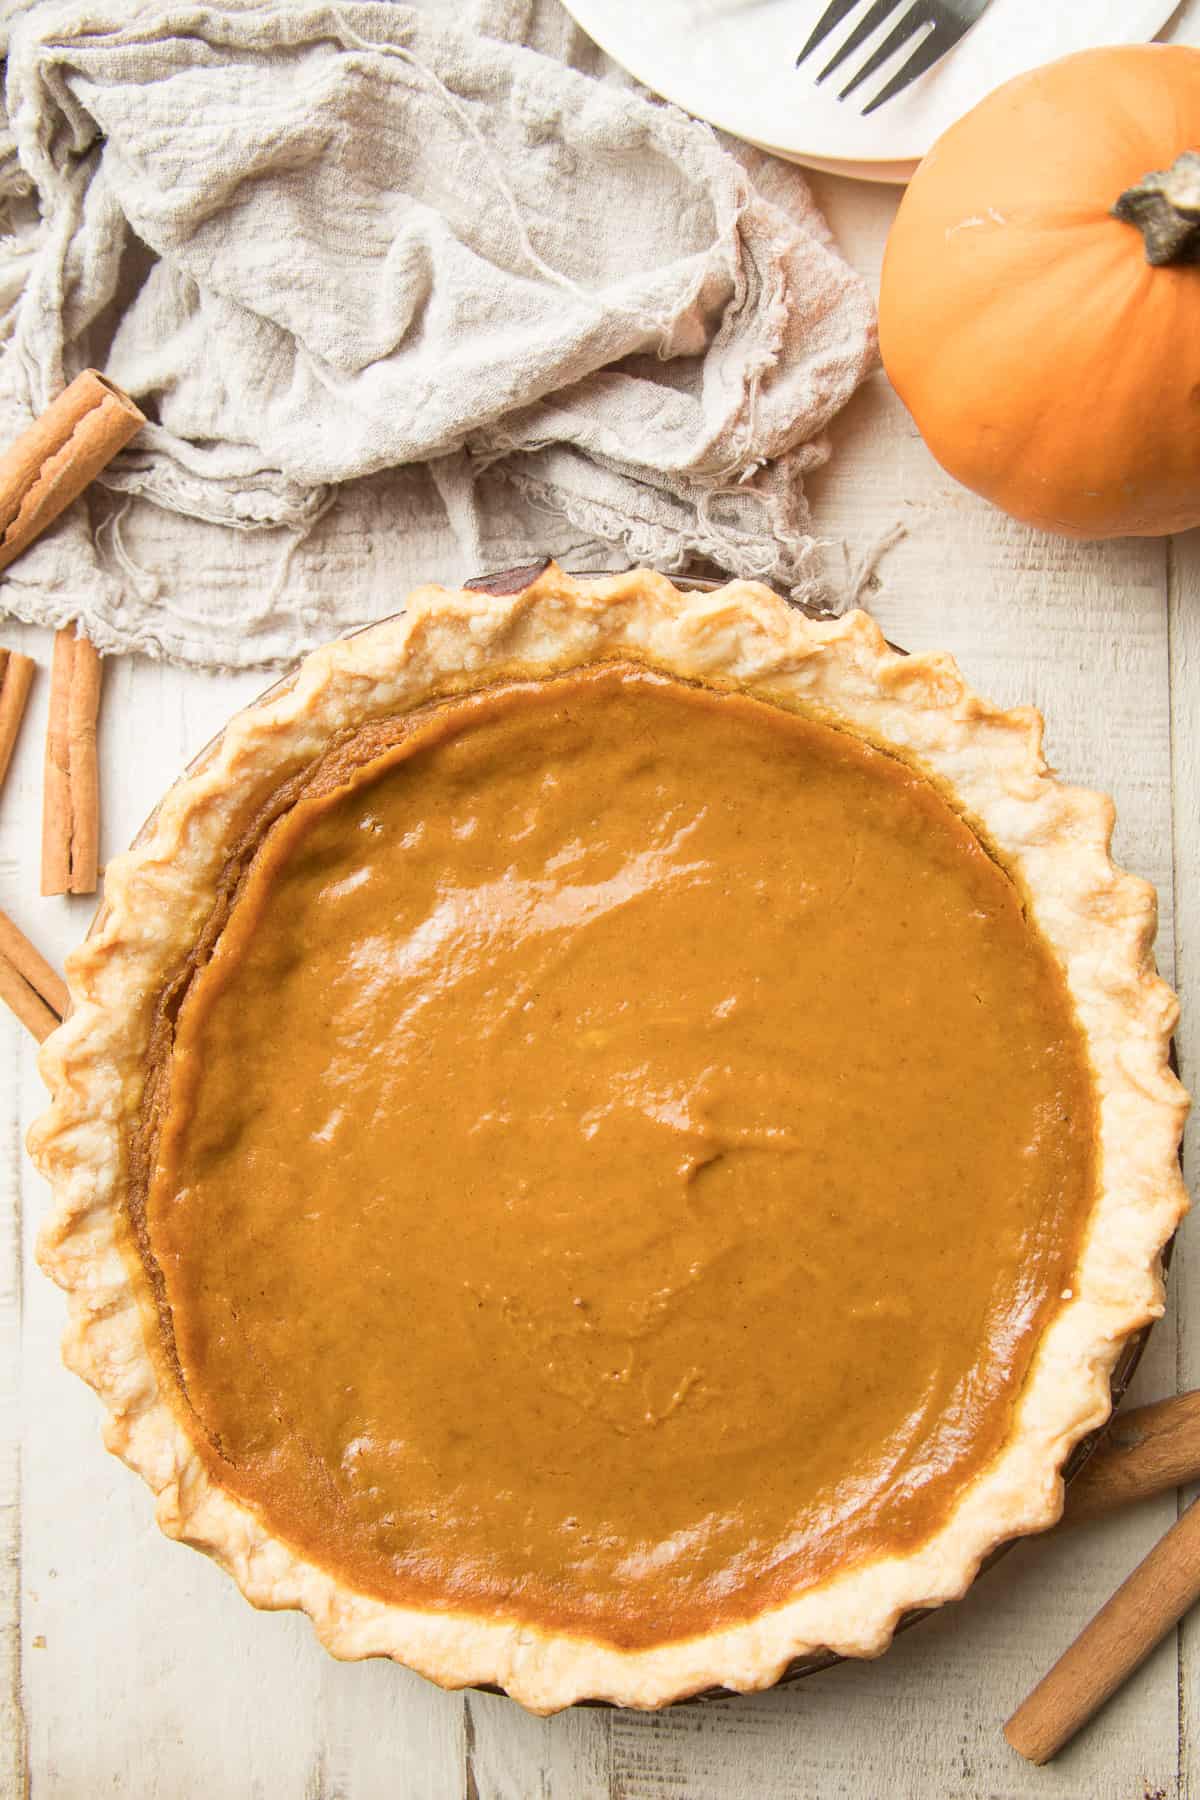 Whole Vegan Pumpkin Pie on a white wooden surface surrounded by cinnamon sticks and a sugar pumpkin.